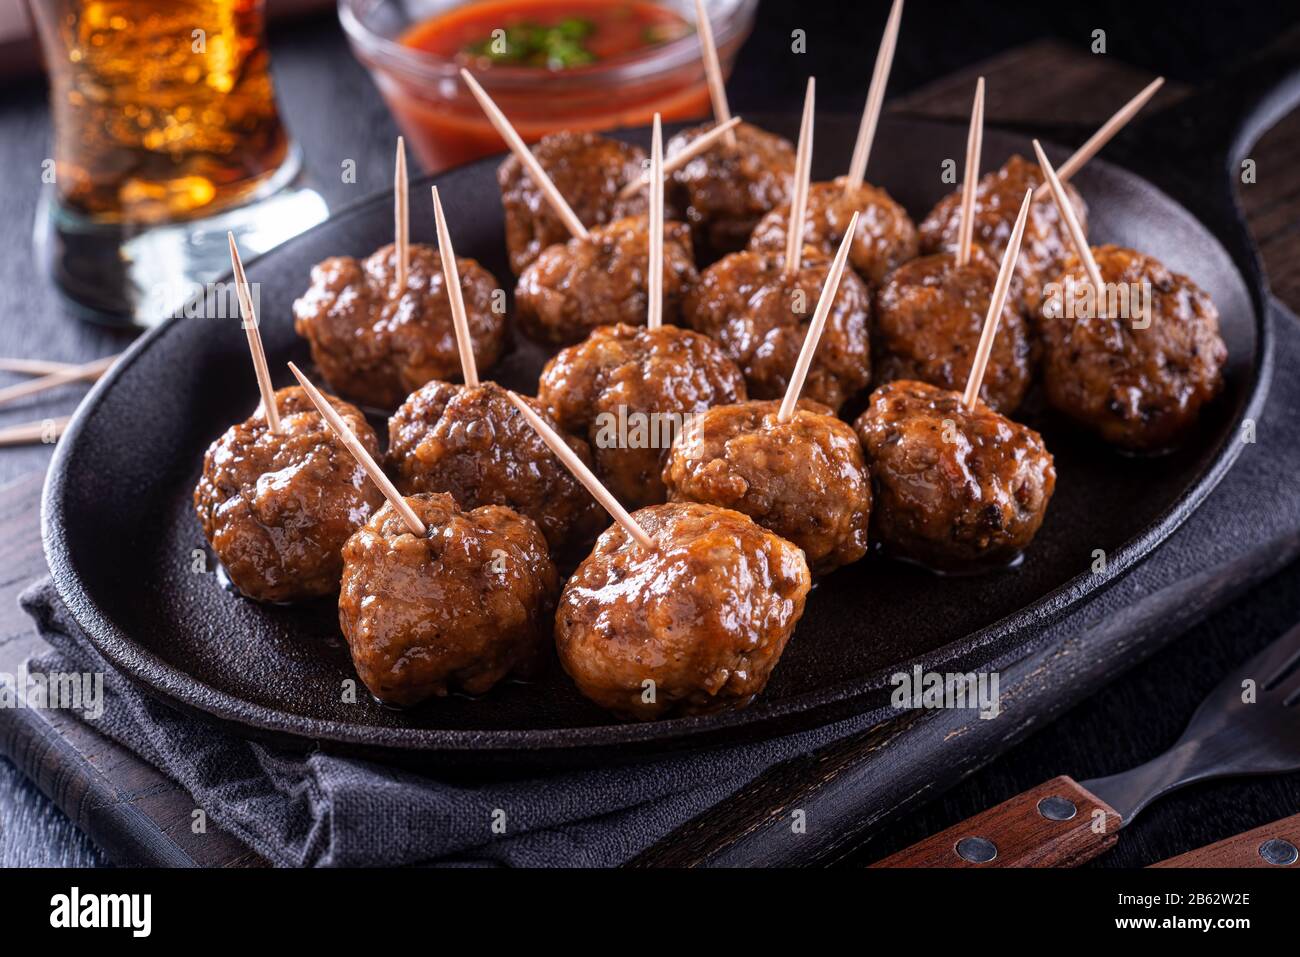 A platter of delicious sweet and spicy meatballs. Stock Photo